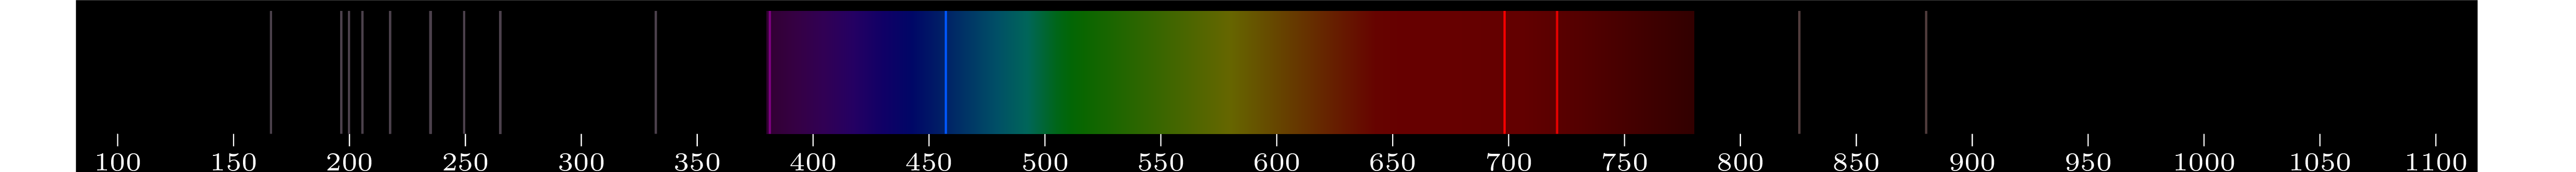 emmision spectra of element Be